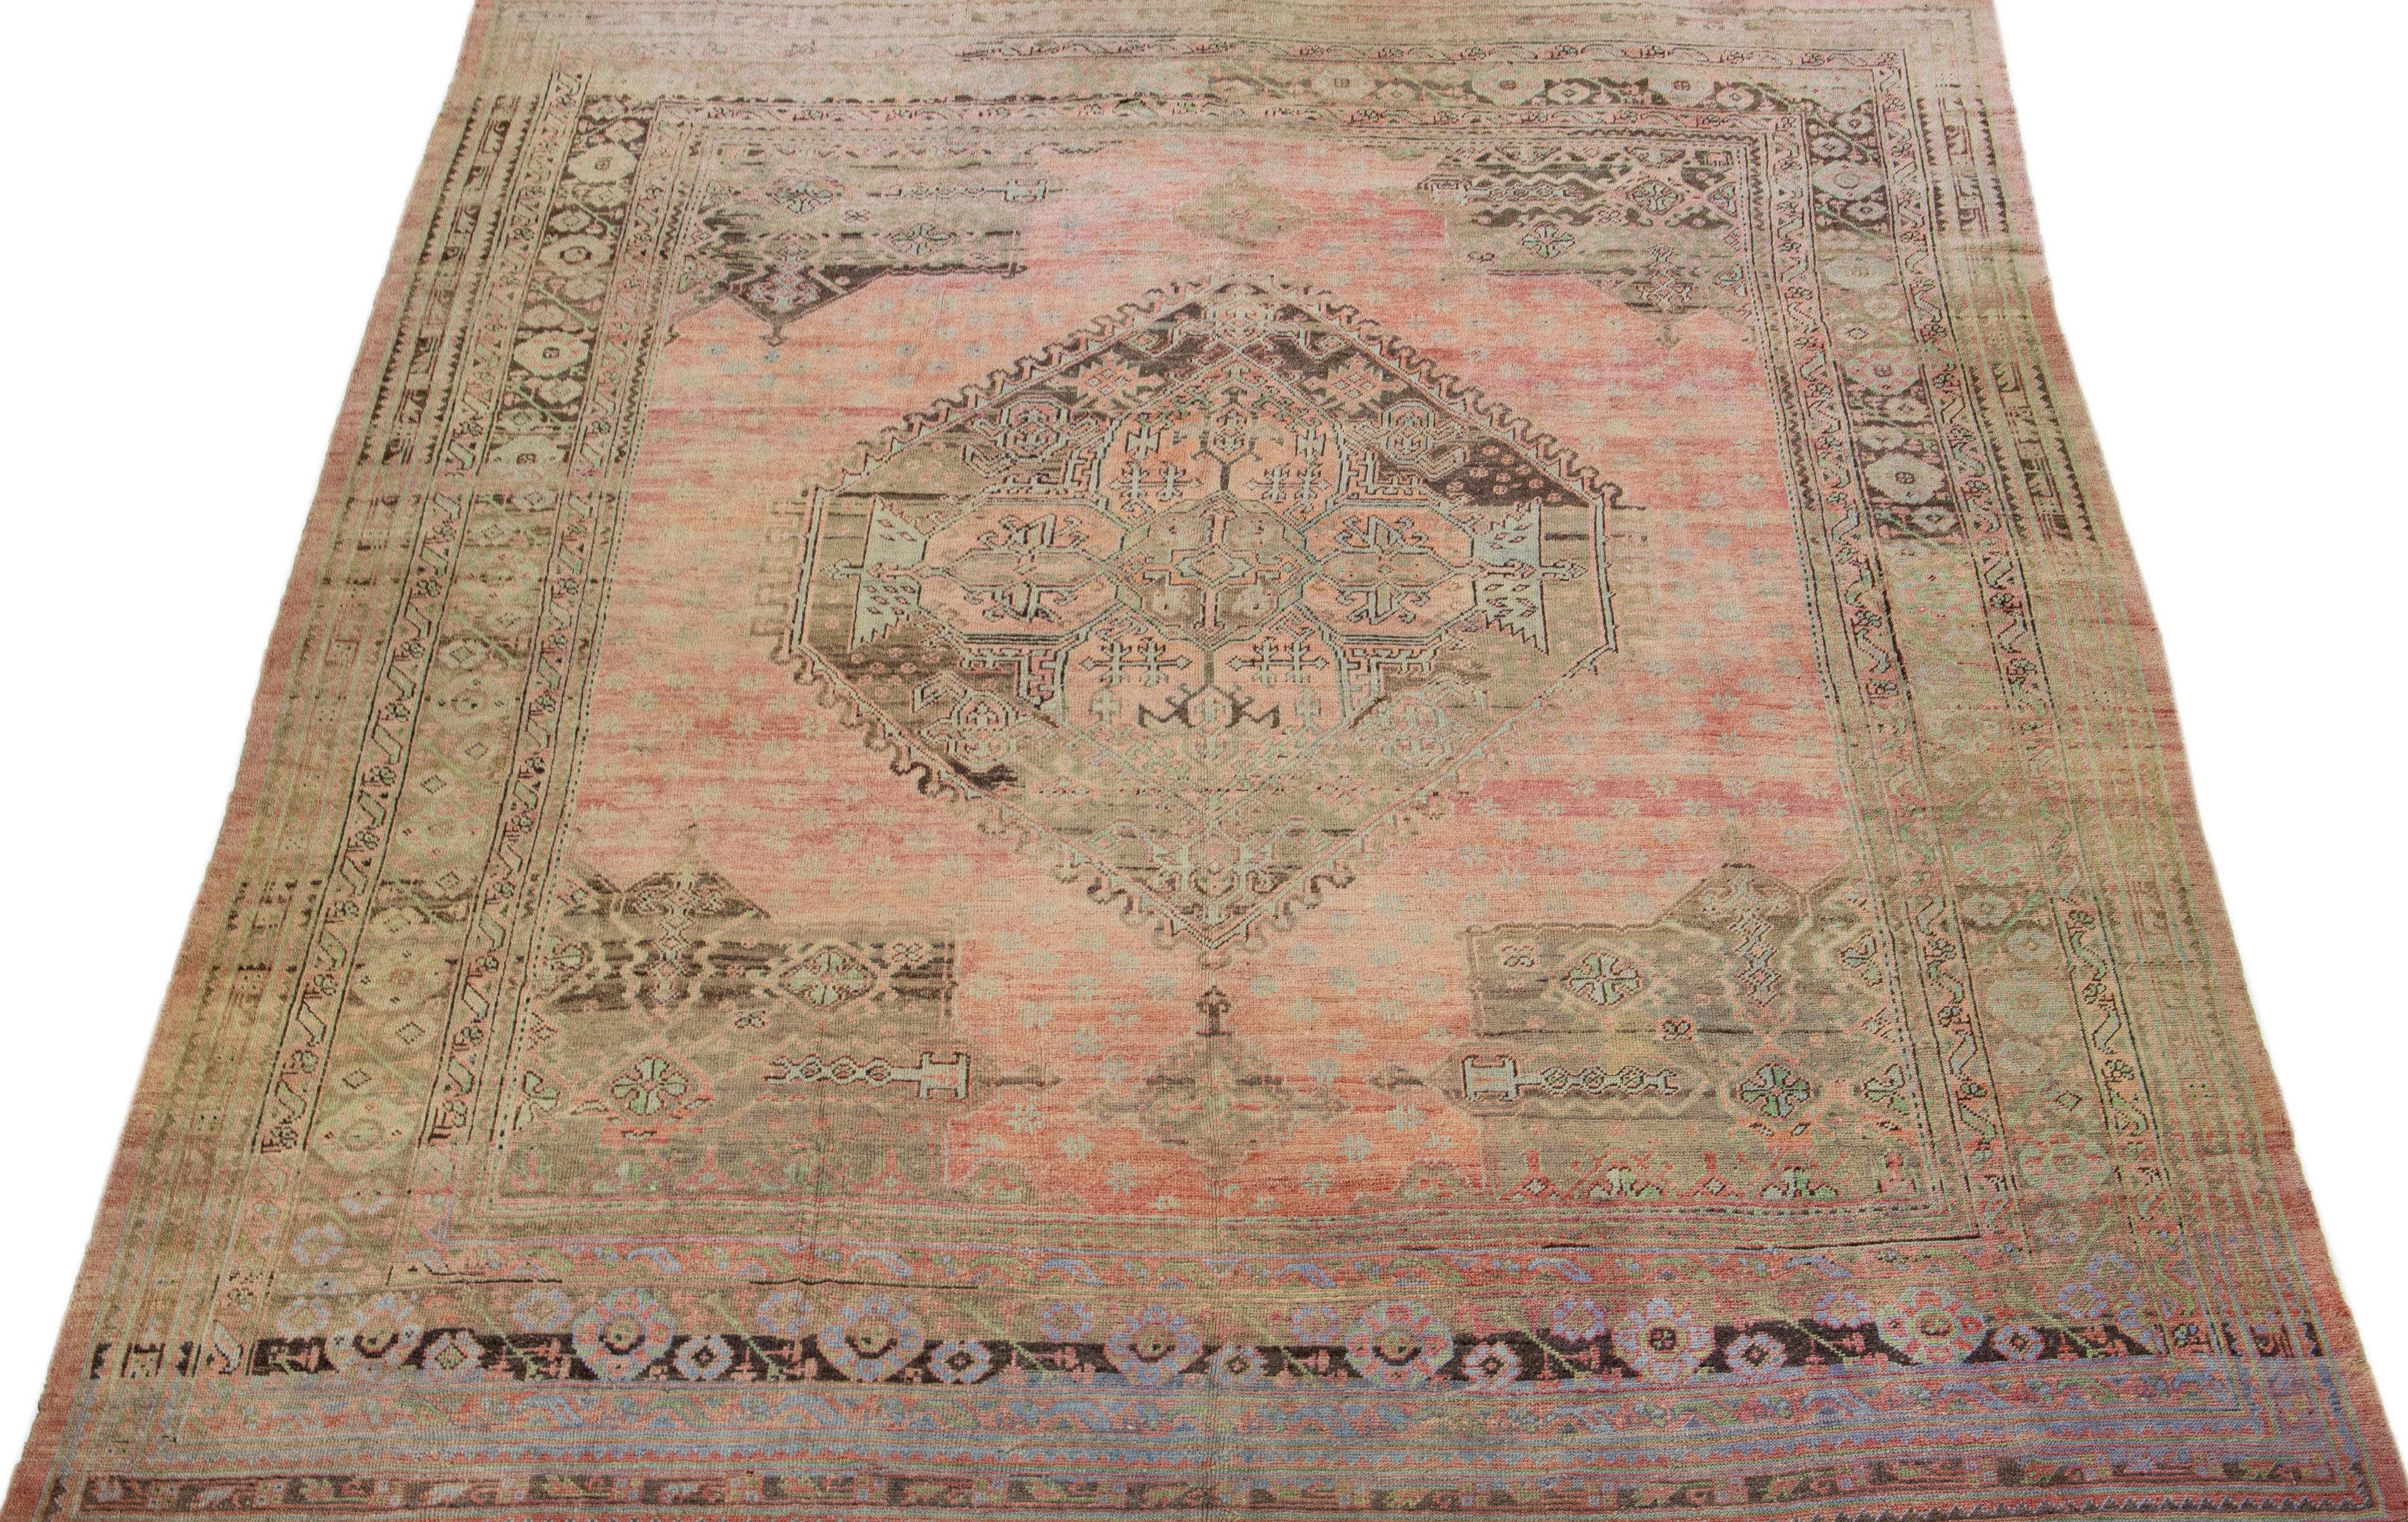 Beautiful Antique Oushak hand-knotted wool rug with a rose color field. This Piece has green, gray, and blue accent colors in a gorgeous all-over medallion design.

This rug measures: 13'2